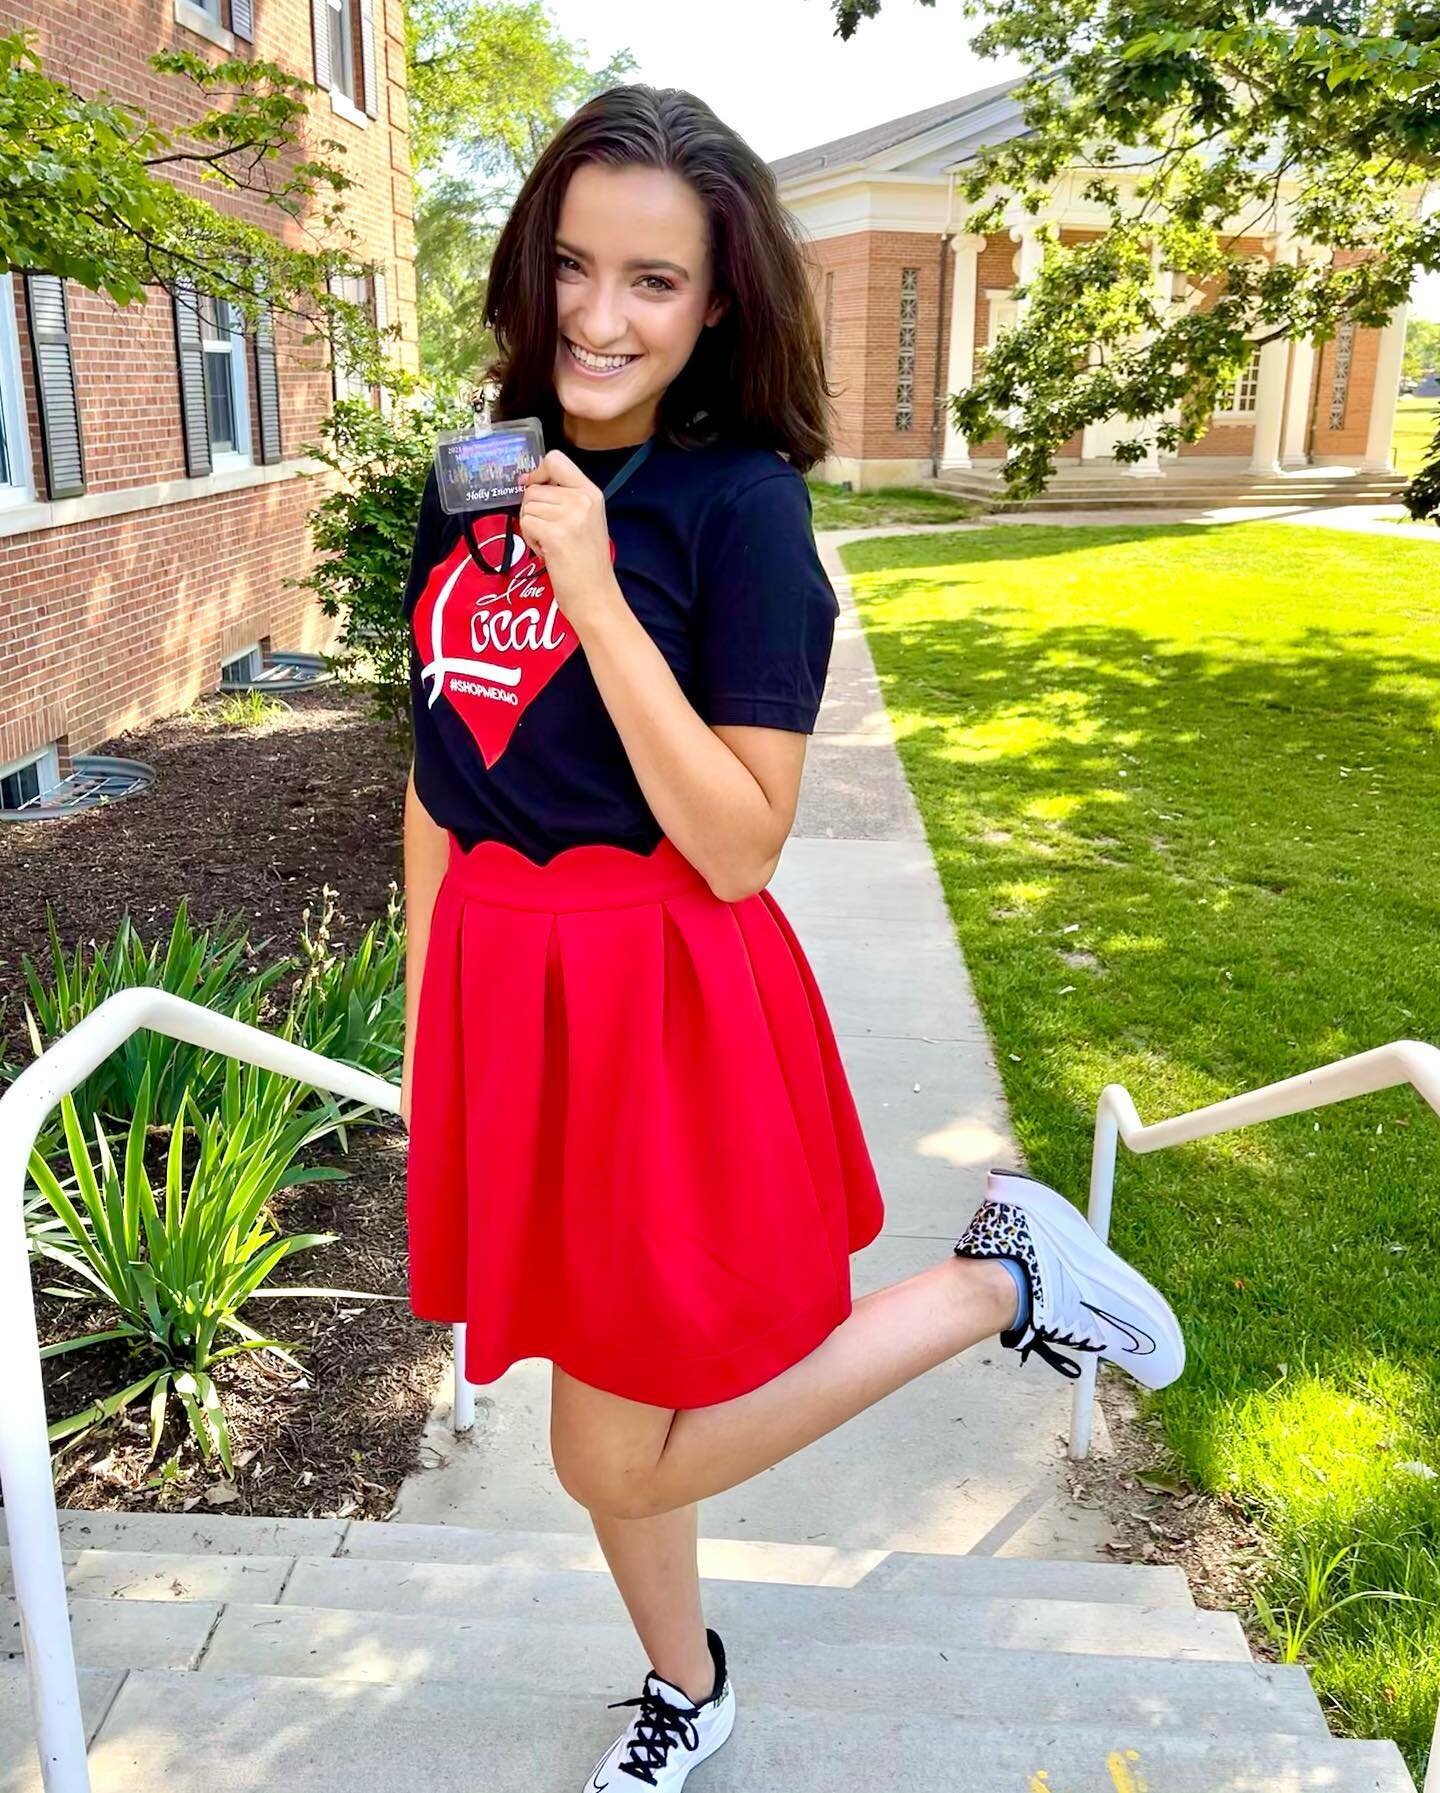 LOVE LOCAL, LOVE MEX, MO! #ShopMexMo #MissMOMexMO #MissMissouri 

Big thank you to our many sponsors in the Mexico community that support the Miss Missouri Scholarship Organization. 

📸: @missmoberly.2020